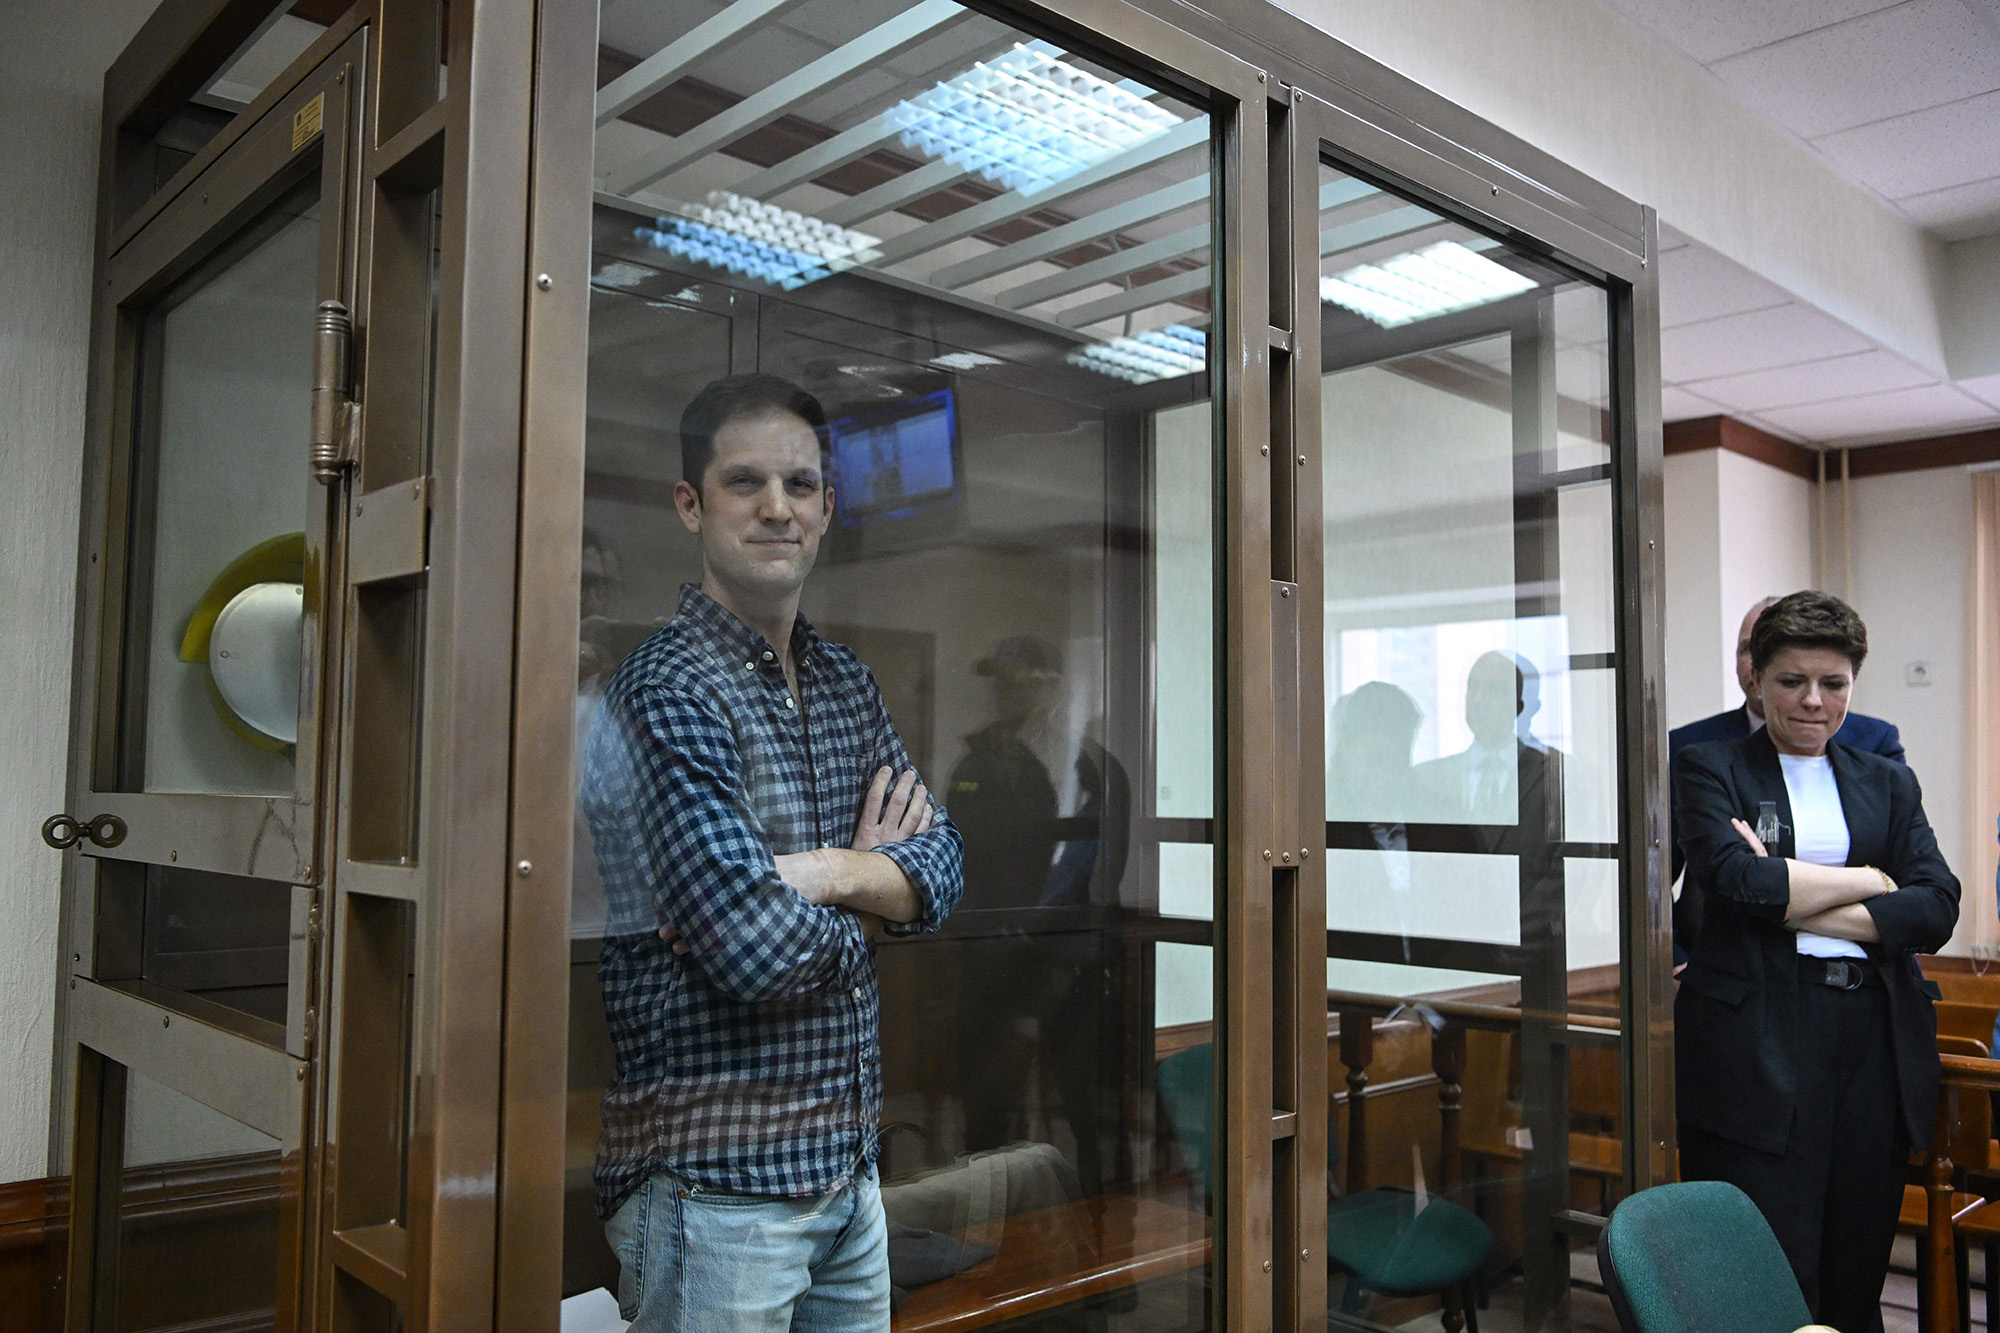 Jailed Wsj Reporter Evan Gershkovich Appears At Moscow Court To Appeal Detention Egypt Independent